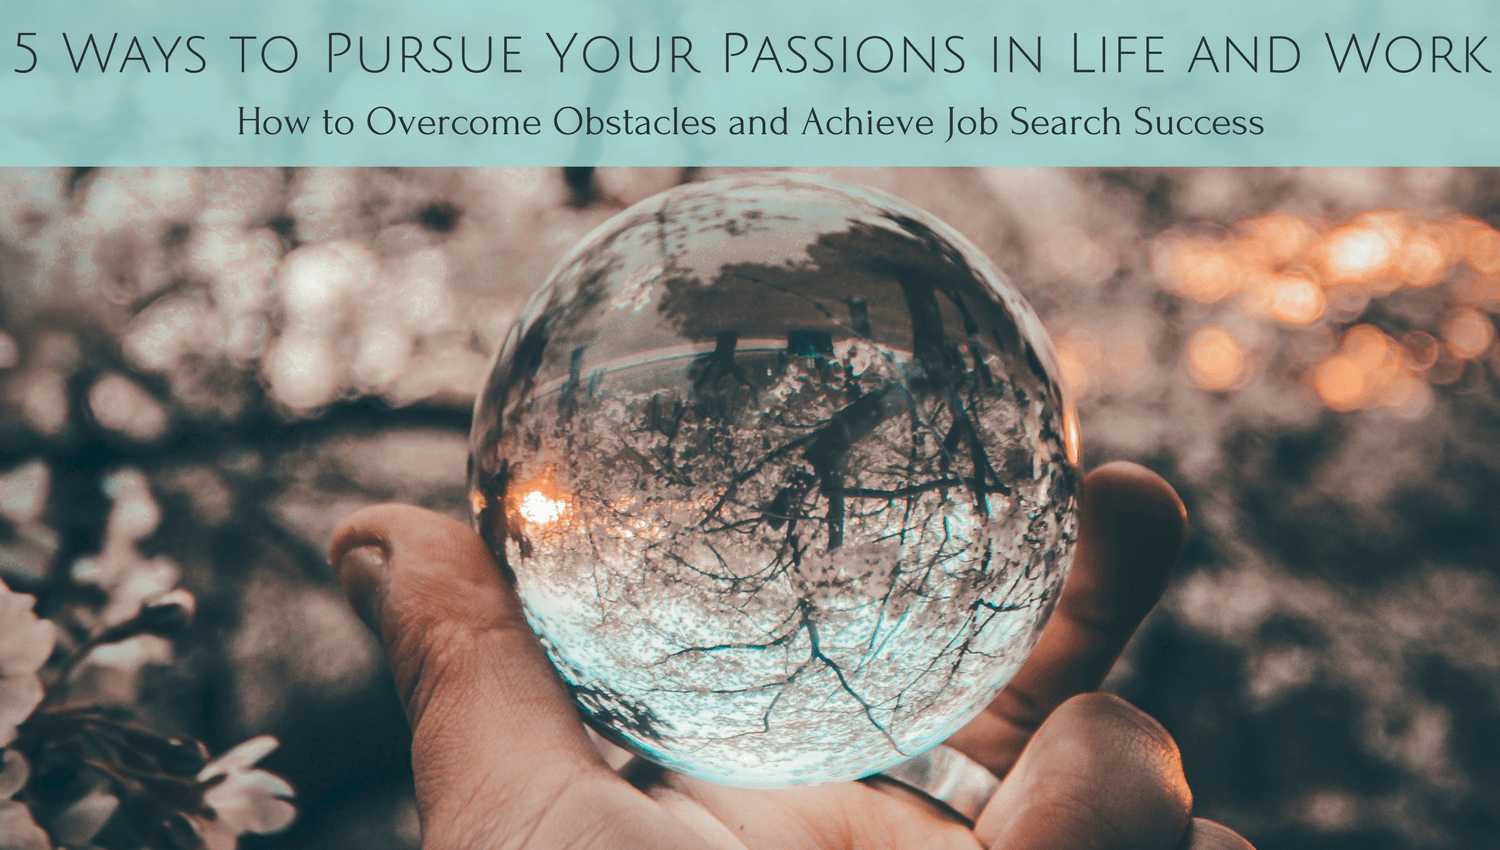 5 Ways to Pursue Your Passions in Life and Work